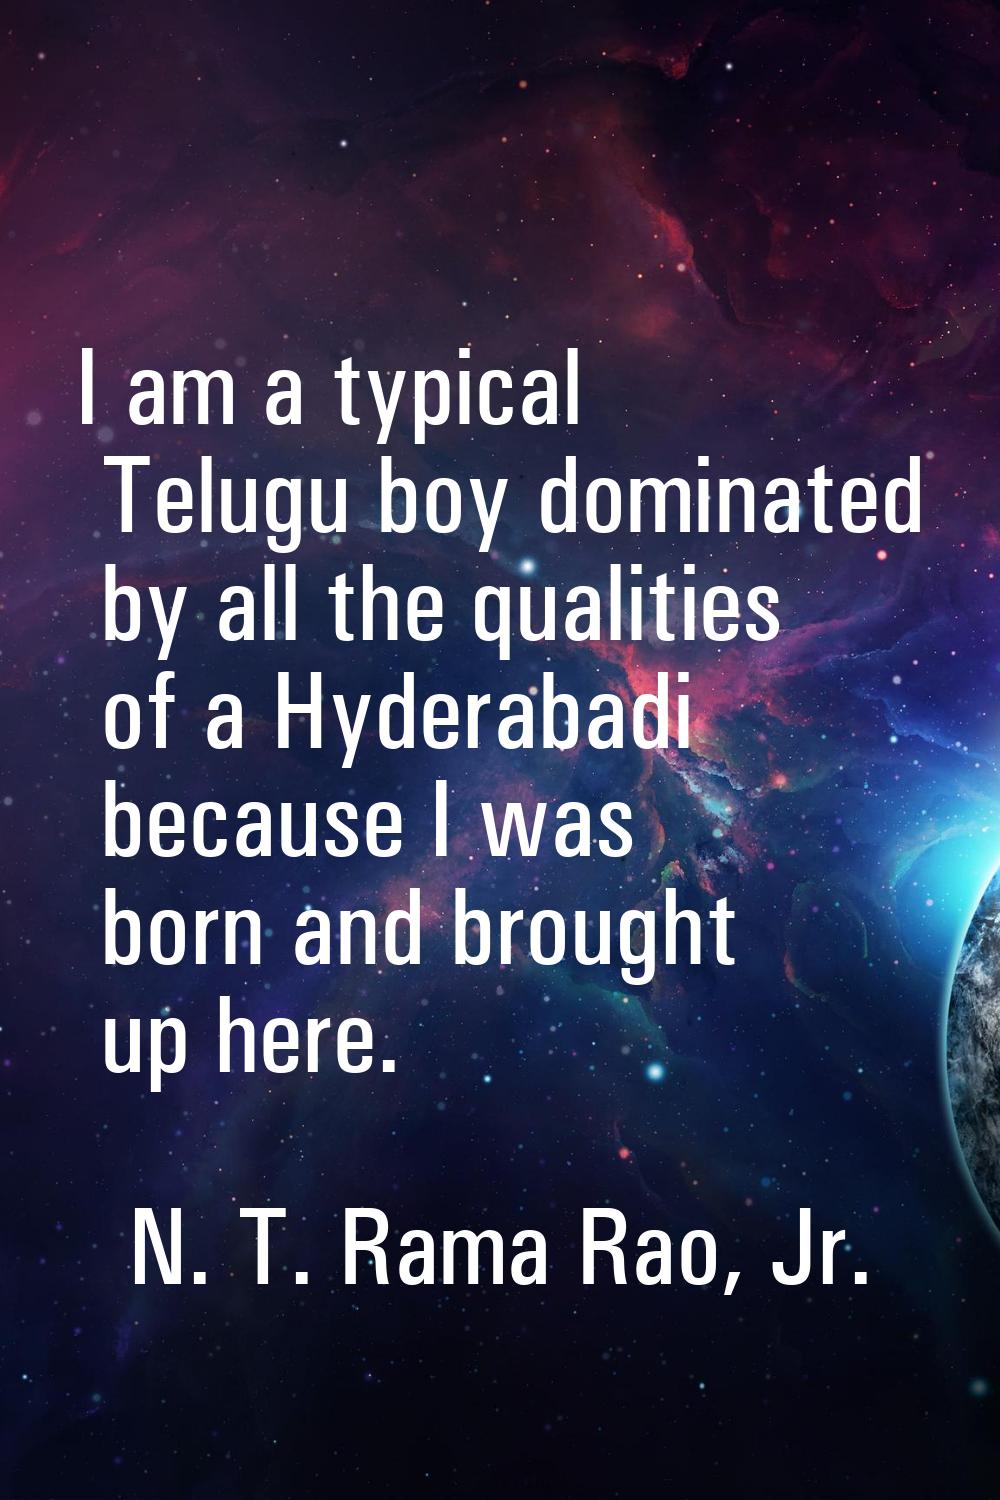 I am a typical Telugu boy dominated by all the qualities of a Hyderabadi because I was born and bro